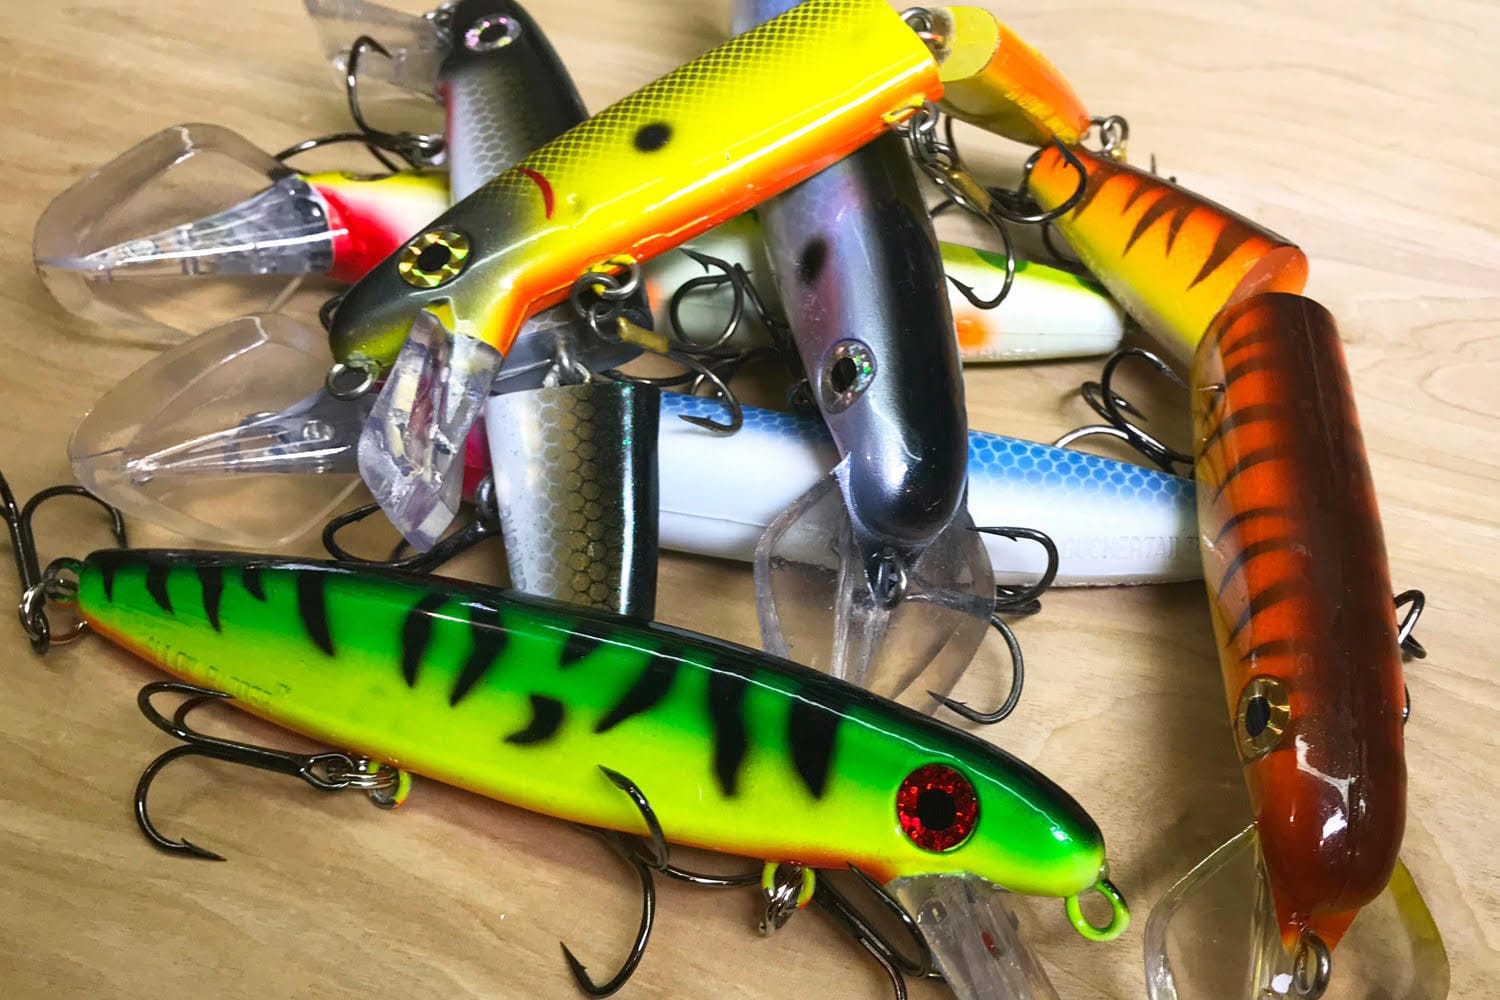 Down South Lures: What color artificial lures should you use